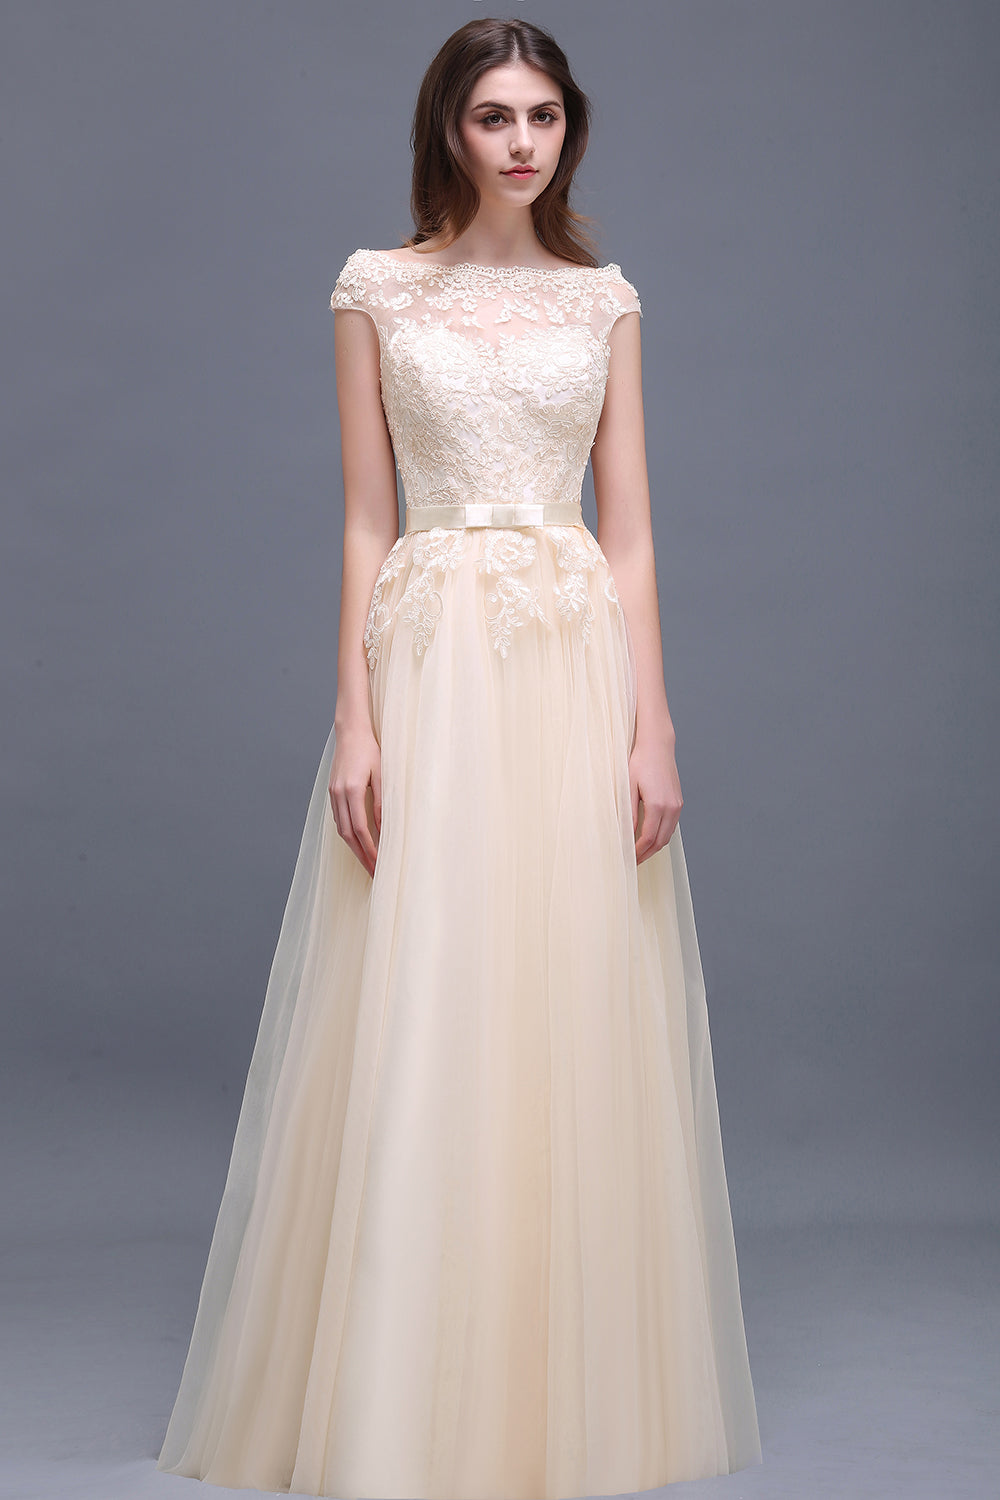 Affordable Off-the-Shoulder Champagne Bridesmaid Dresses with Appliques